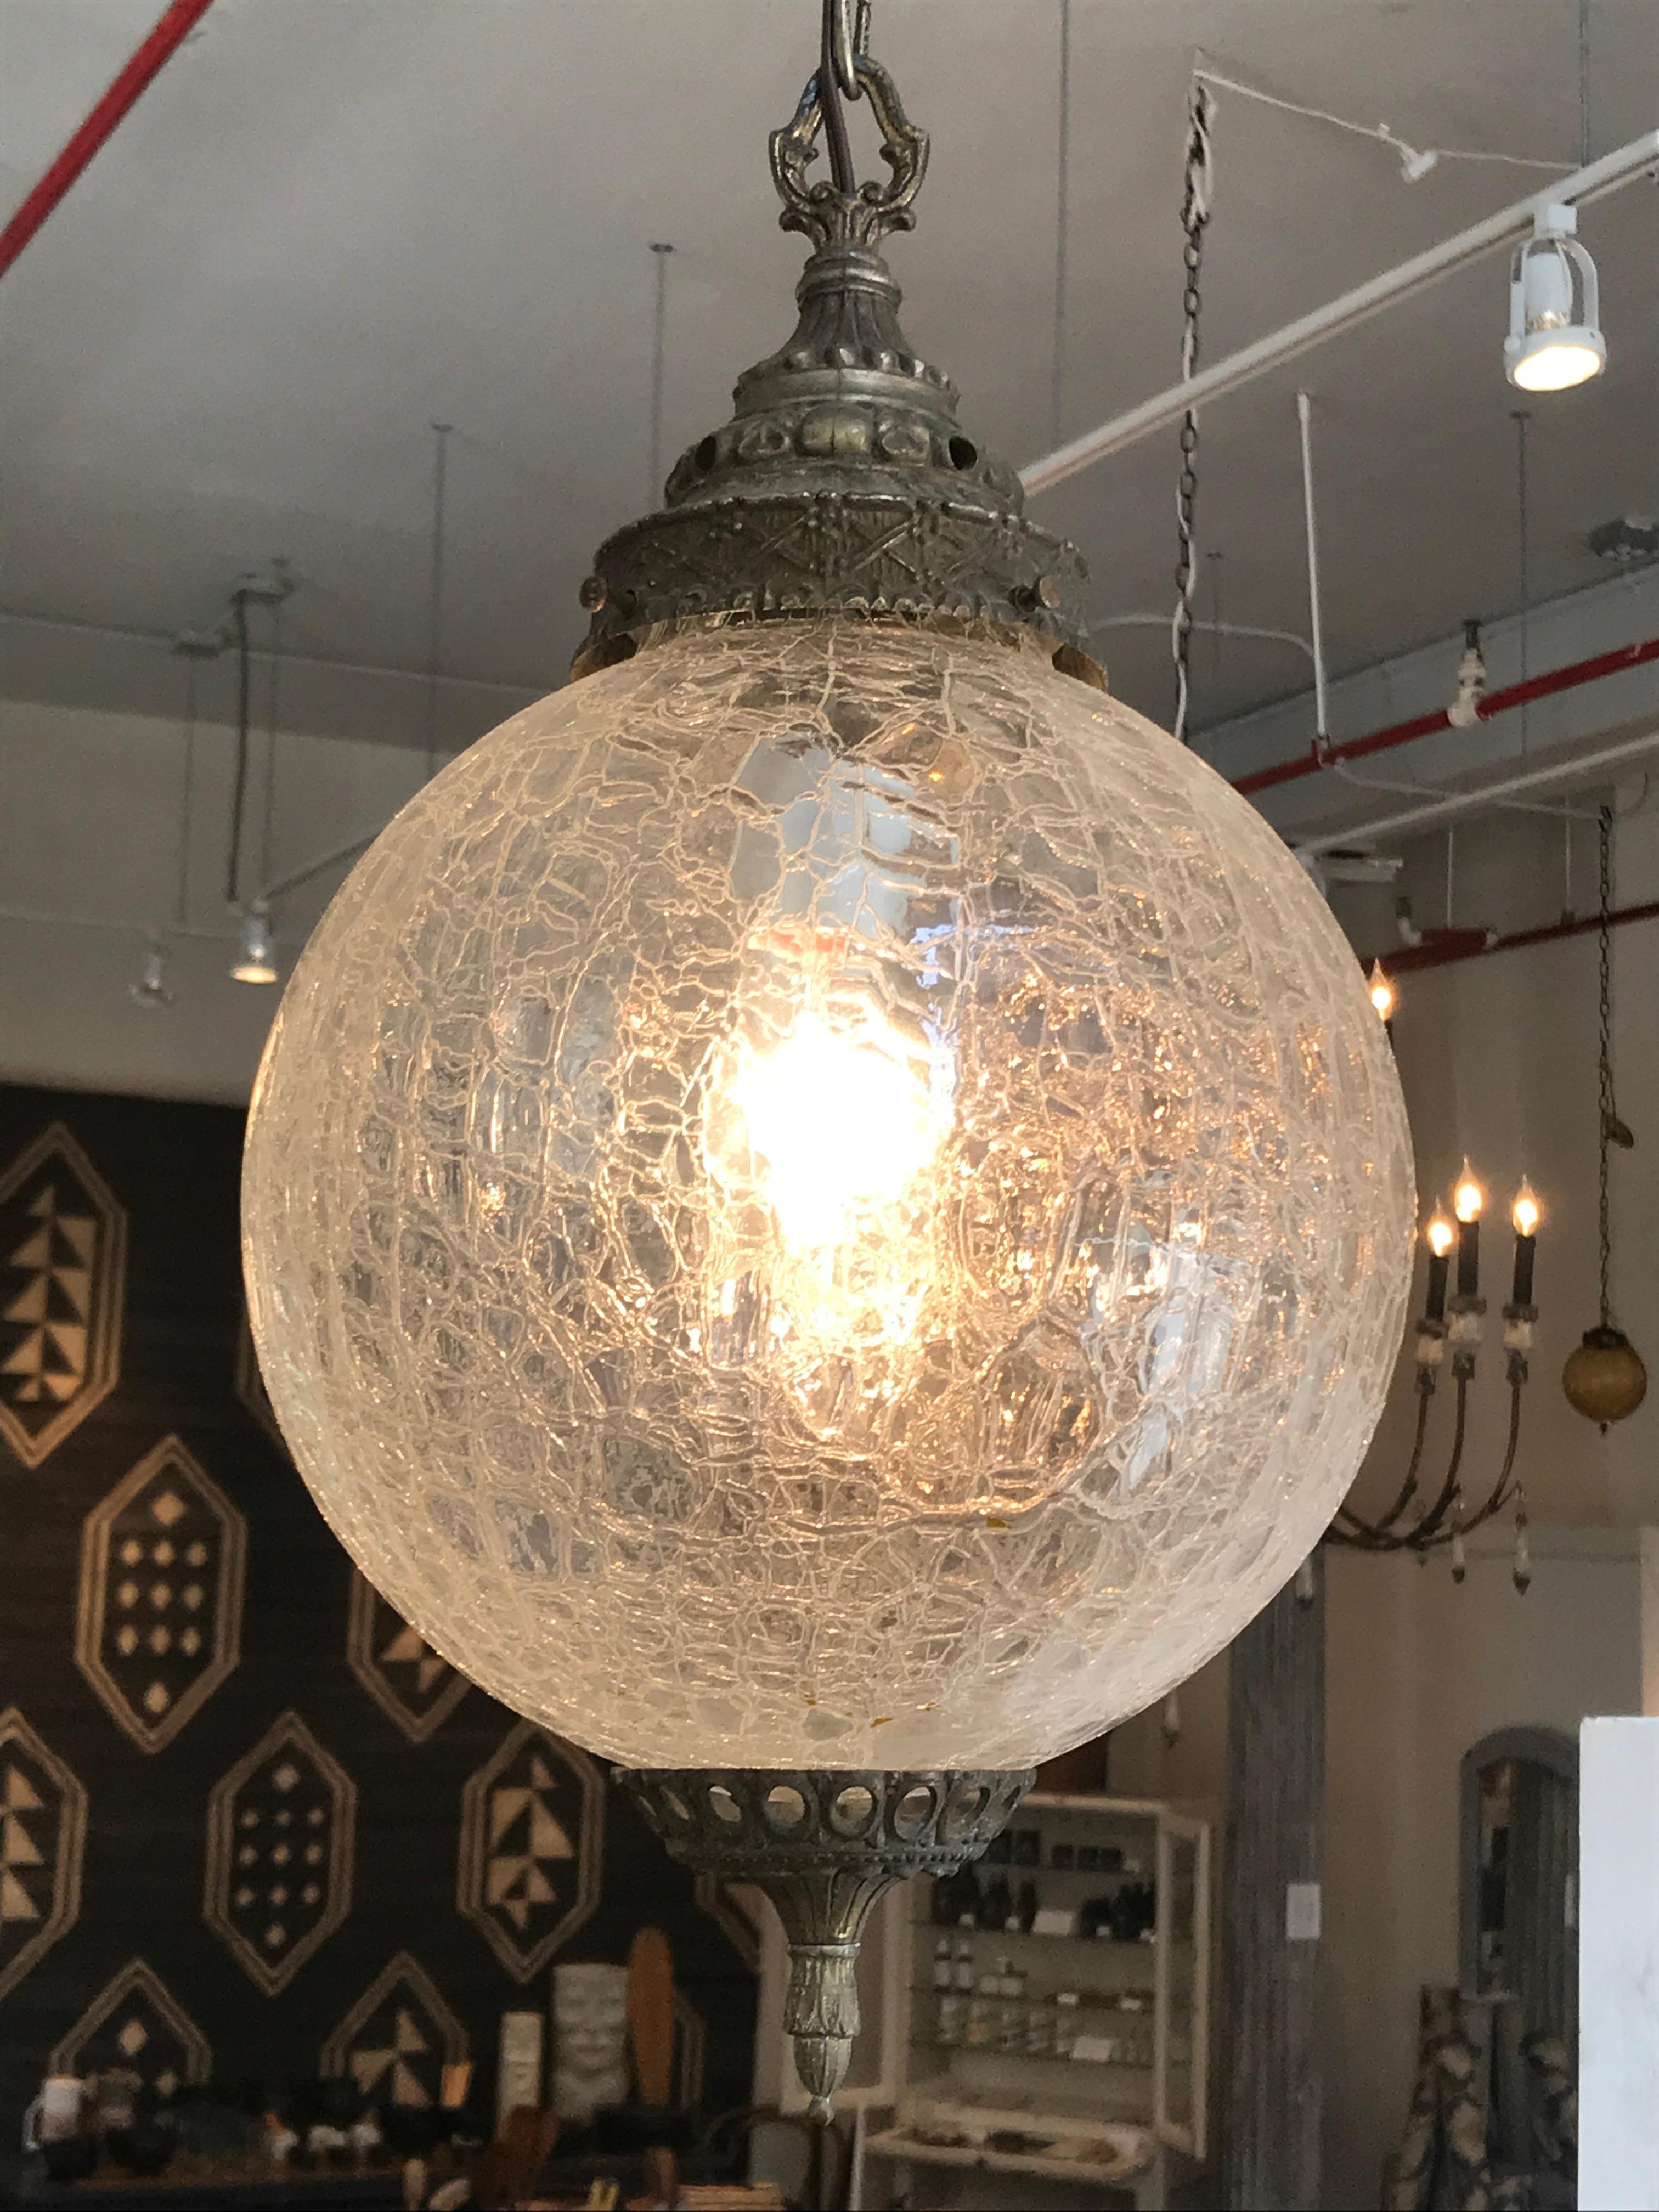 A beautiful midcentury globe pendant with clear textured glass, texture that mimics shattered glass. Subtle detailed brass encasing to finish the pendant.